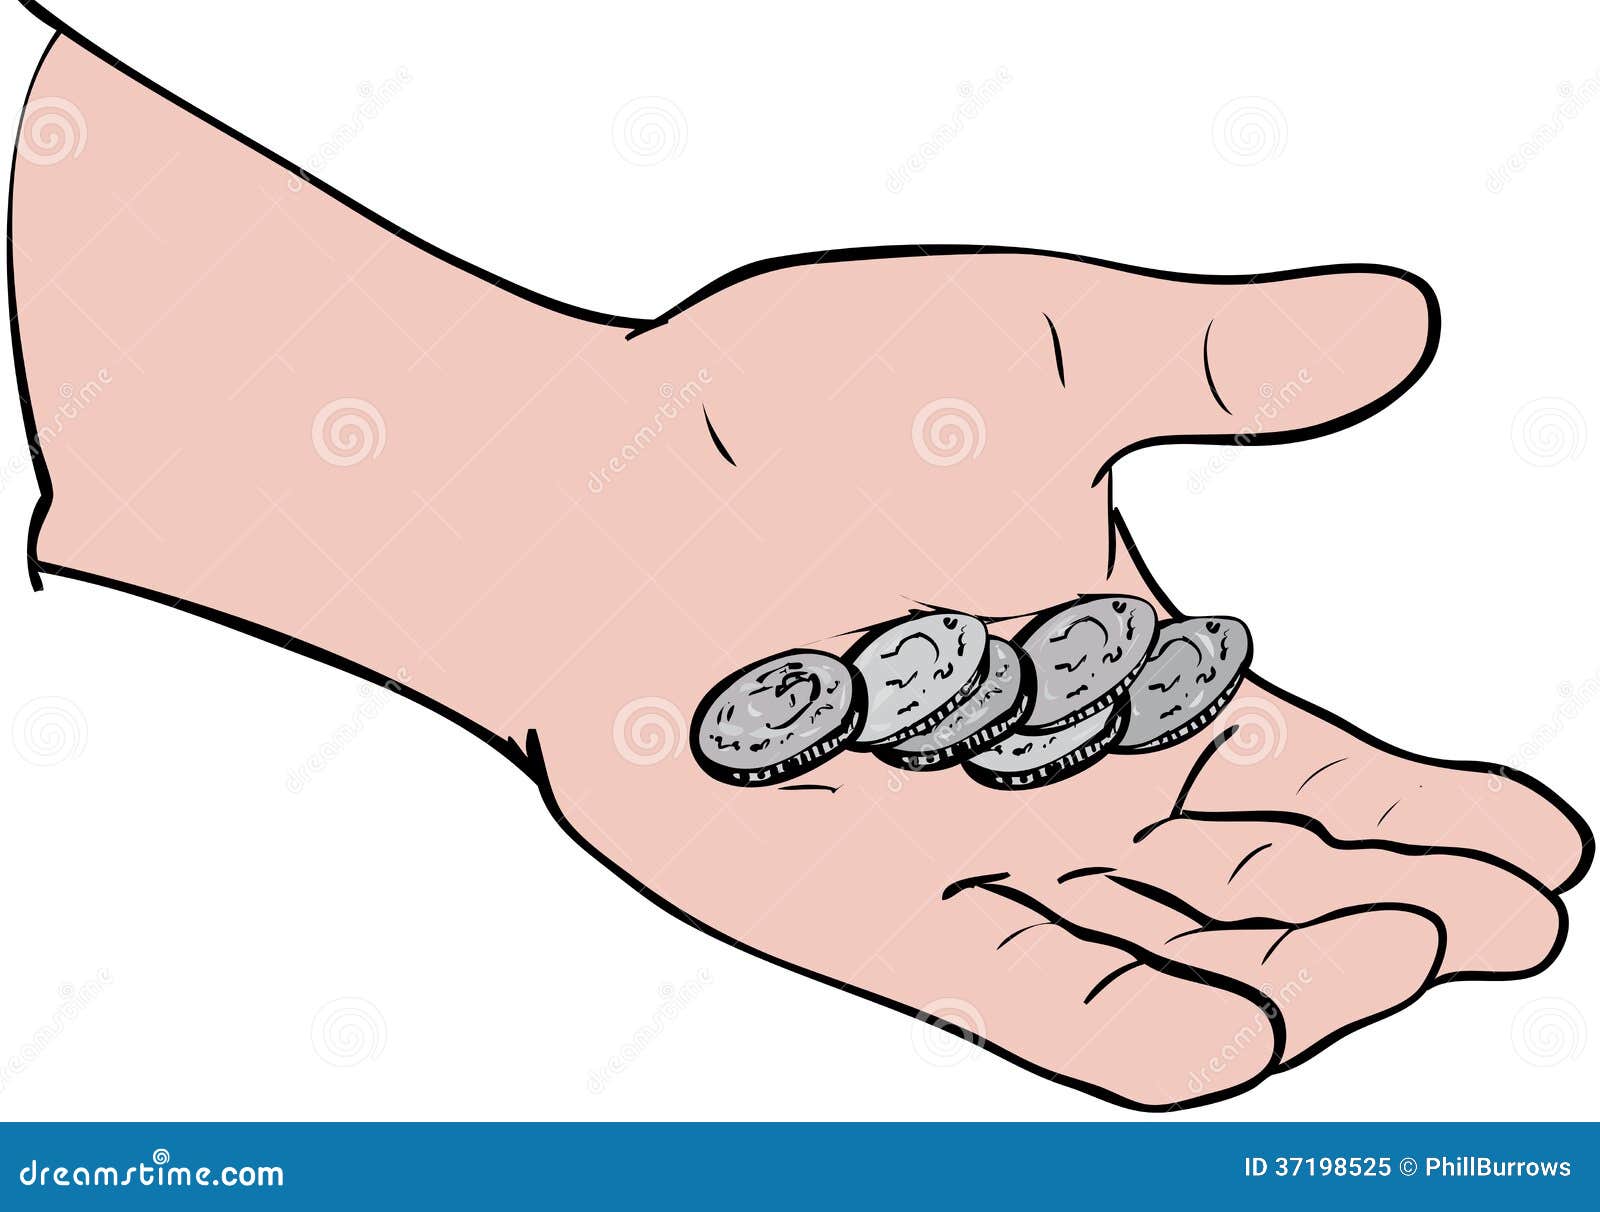 coins in hand